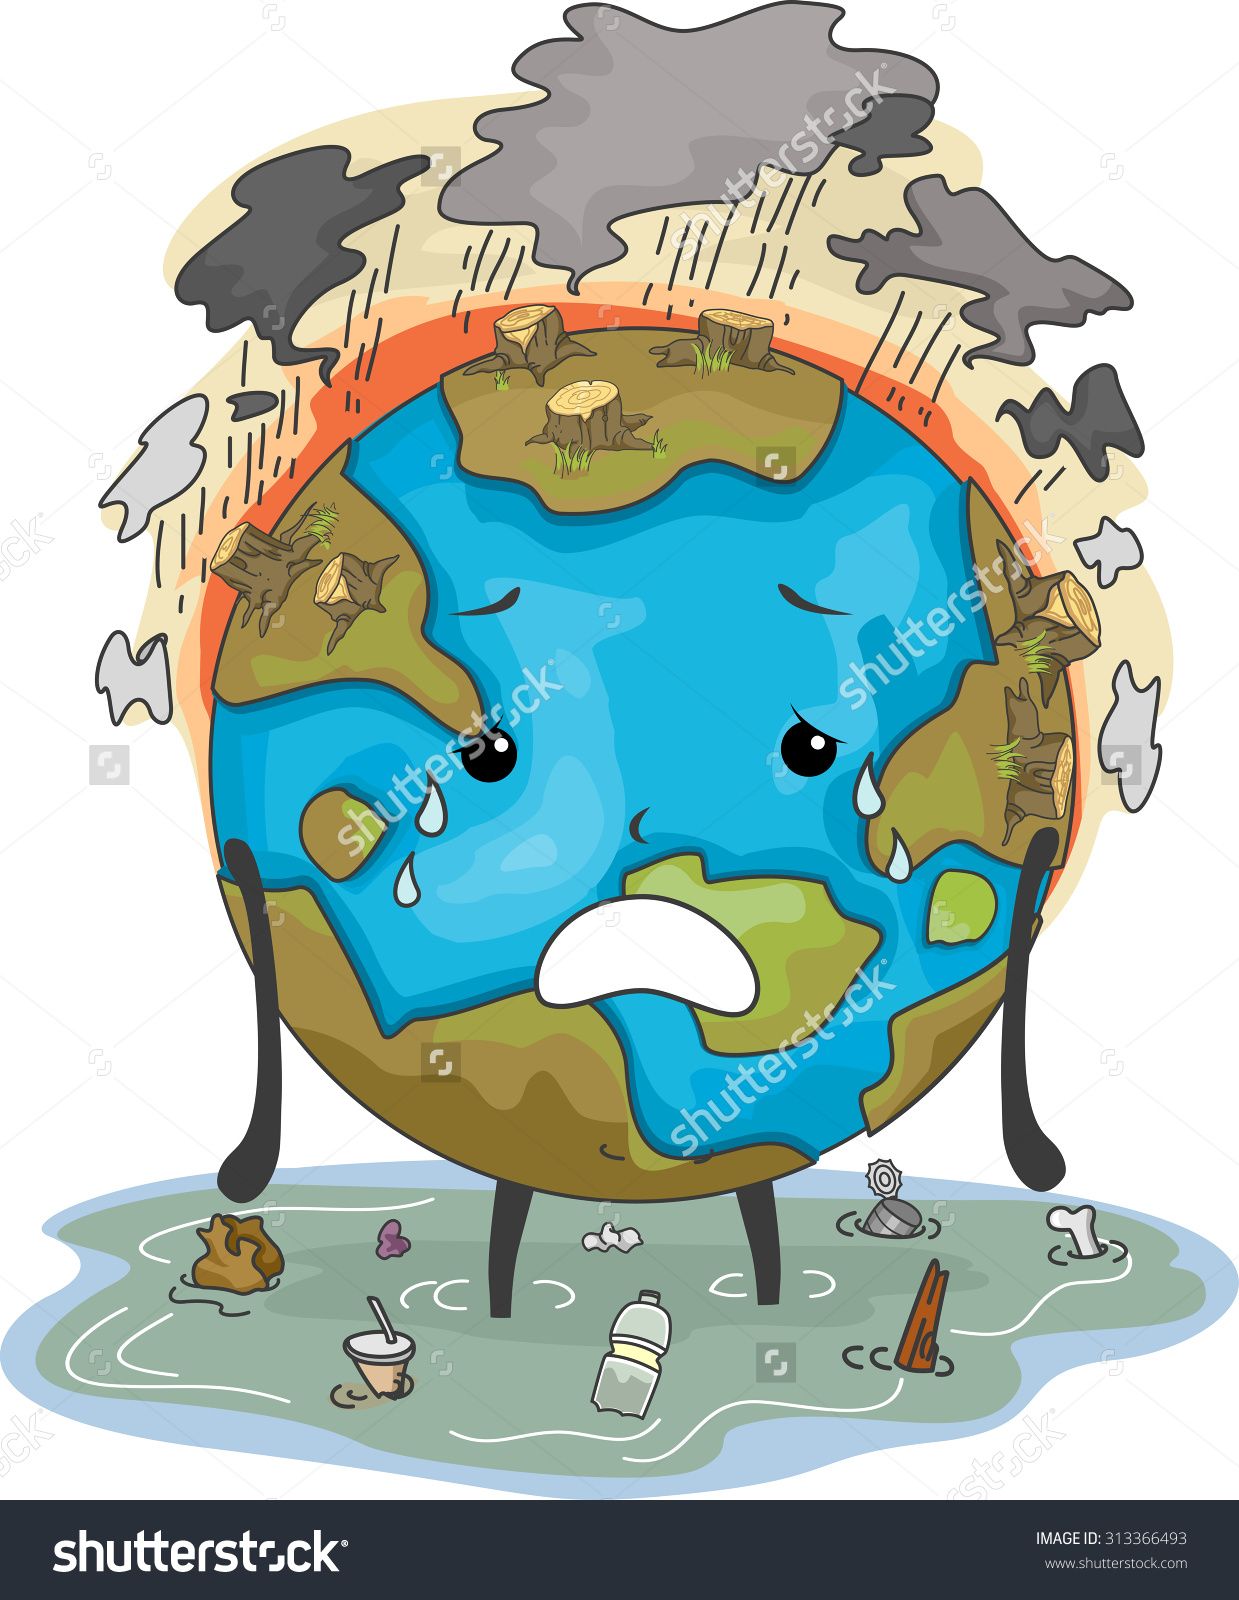 Clipart earth pollution. Pin by kev l